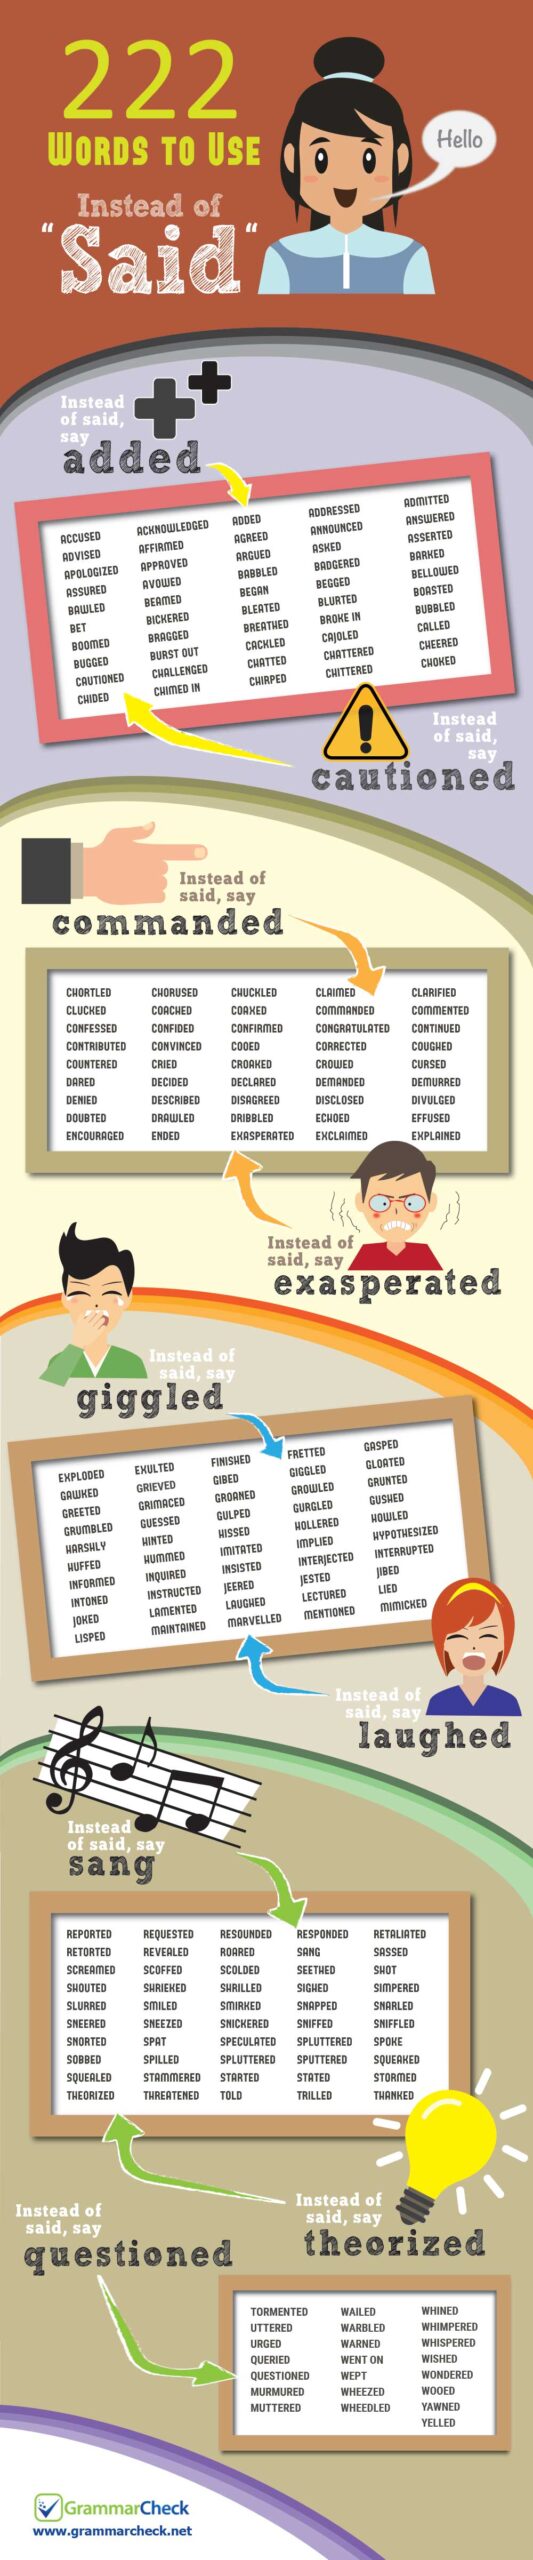 222 Words to Use Instead of 'Said' (Infographic)